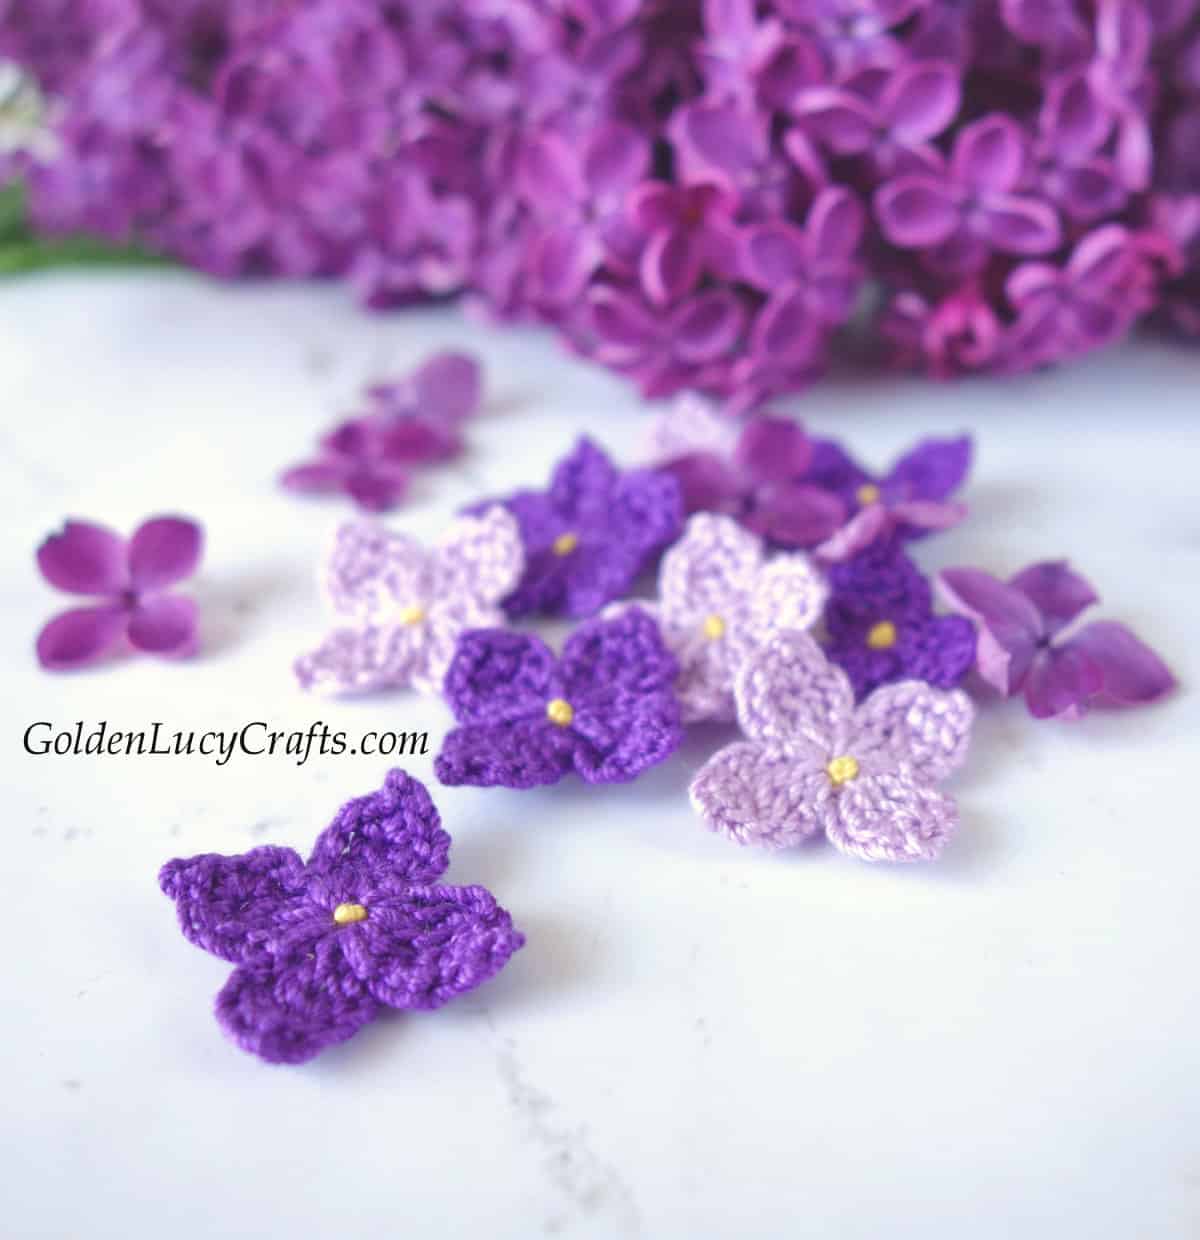 Crocheted lilac flowers, real lilac in the background.